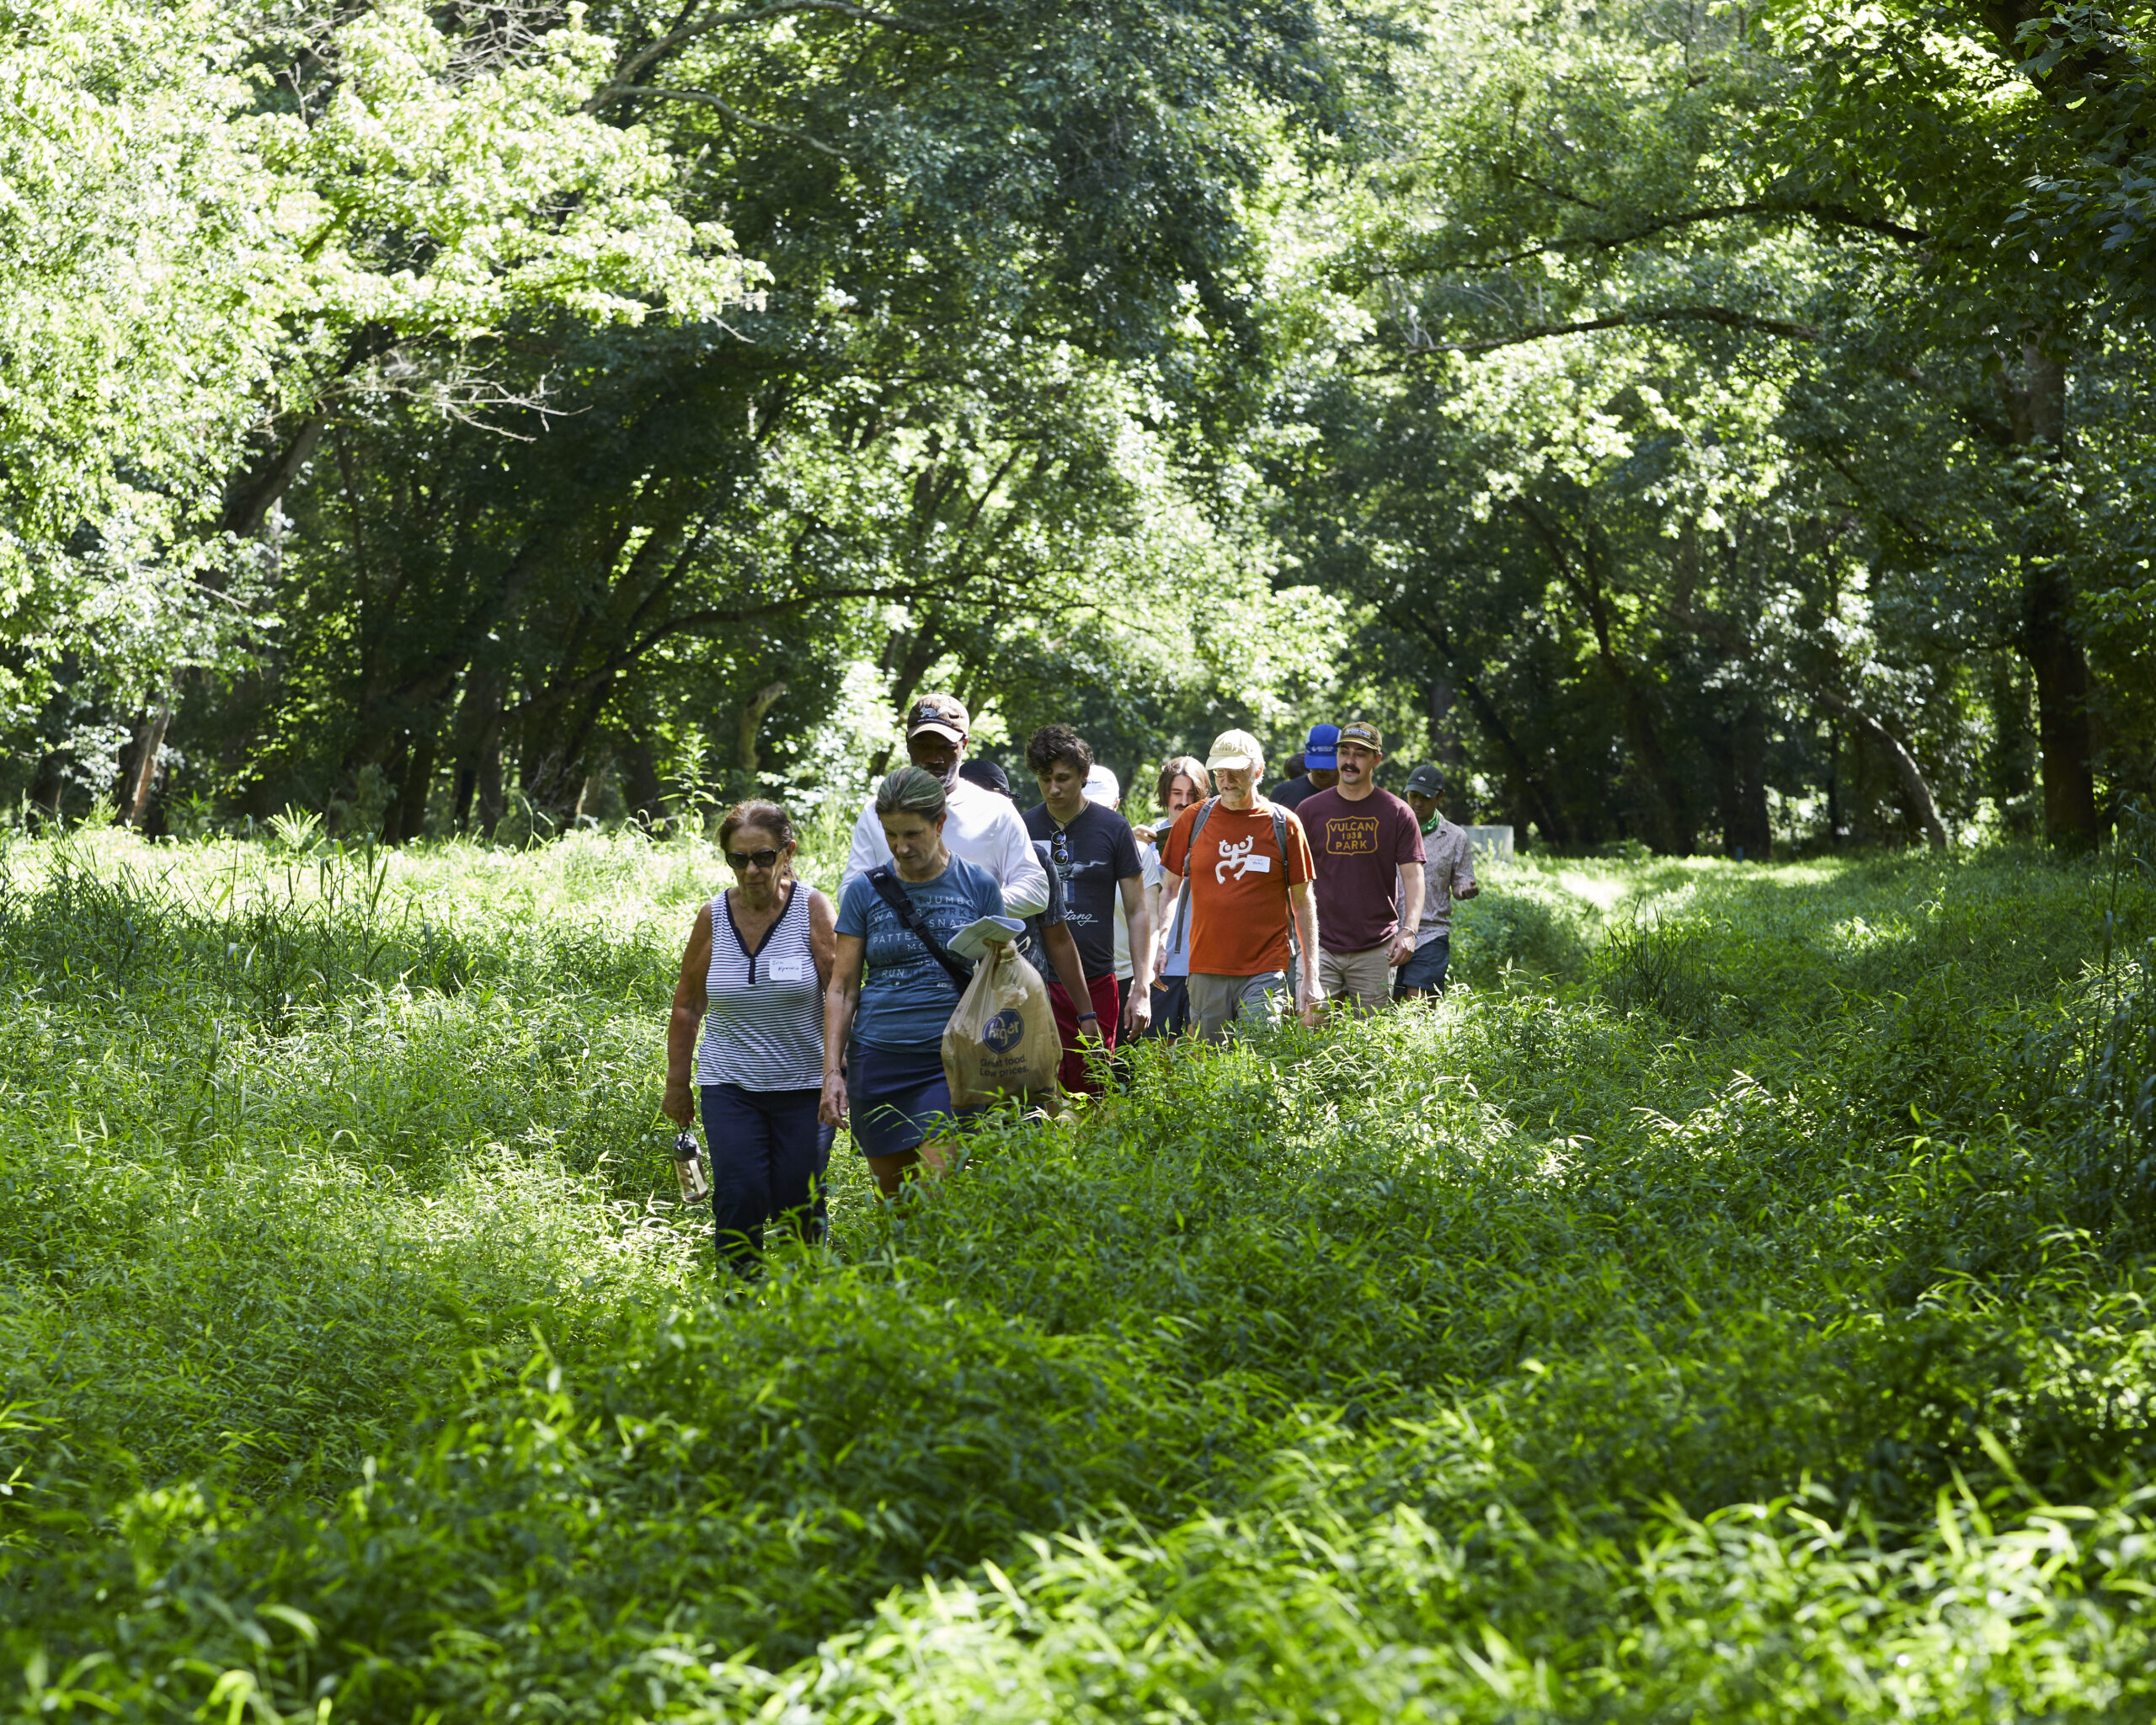 A group of people walking through a forest.